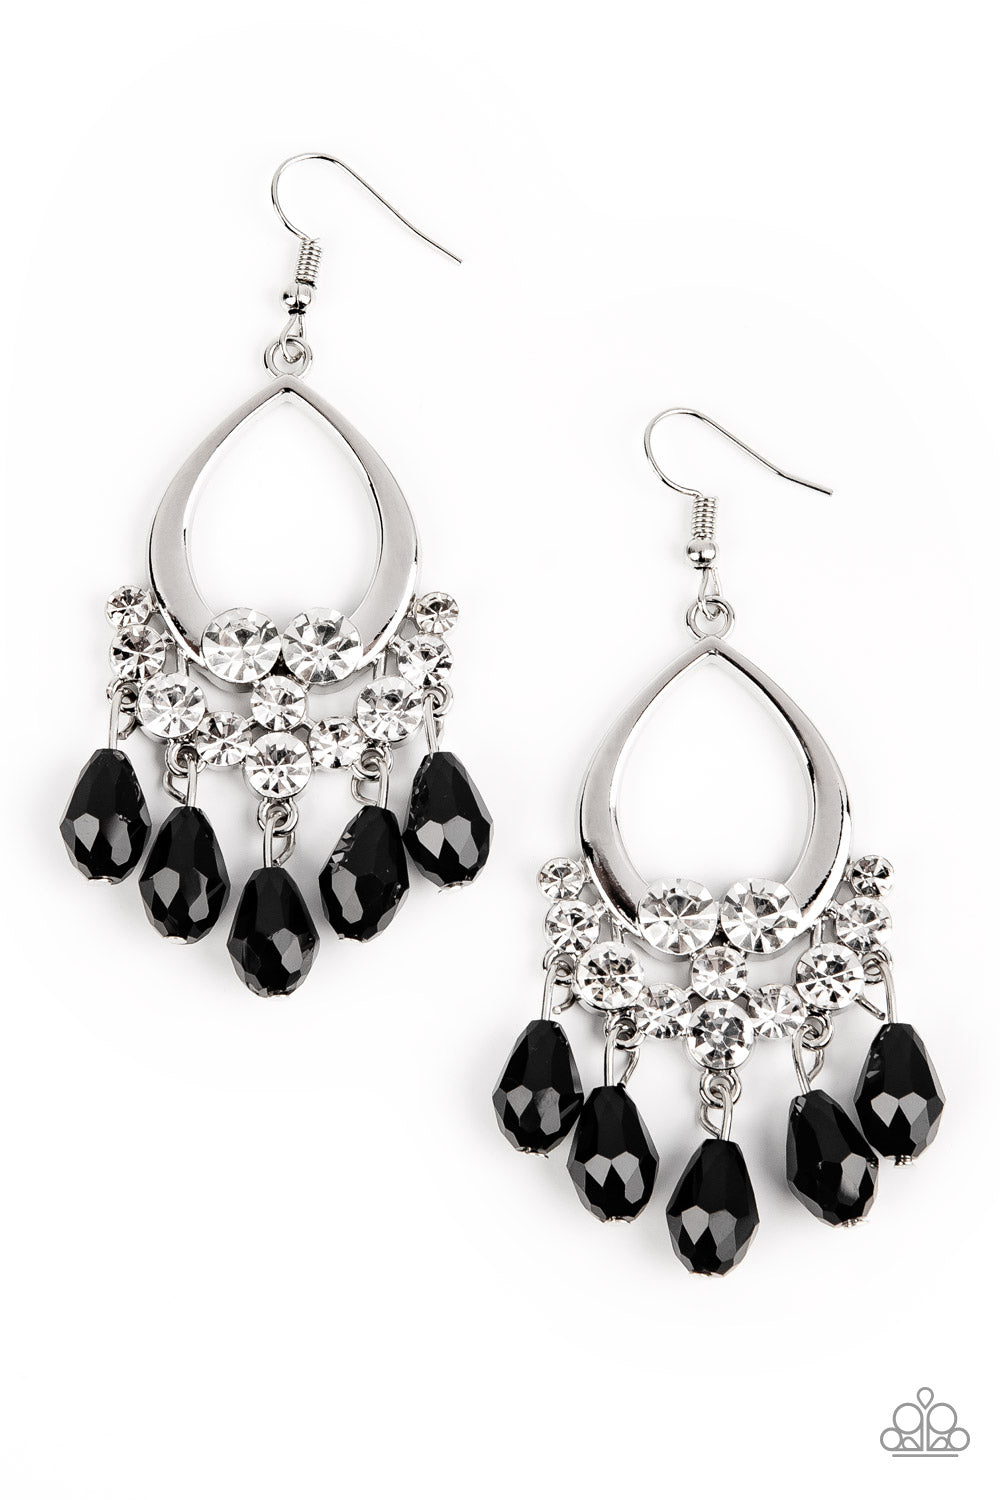 Famous Fashionista - Black Teardrop Gem - Silver Earrings - Paparazzi Accessories - Faceted black teardrop gems cascade from a collection of bubbly white rhinestones at the bottom of a shiny silver teardrop frame, creating a glamorous fringe. Earring attaches to a standard fishhook fitting. Sold as one pair of earrings.